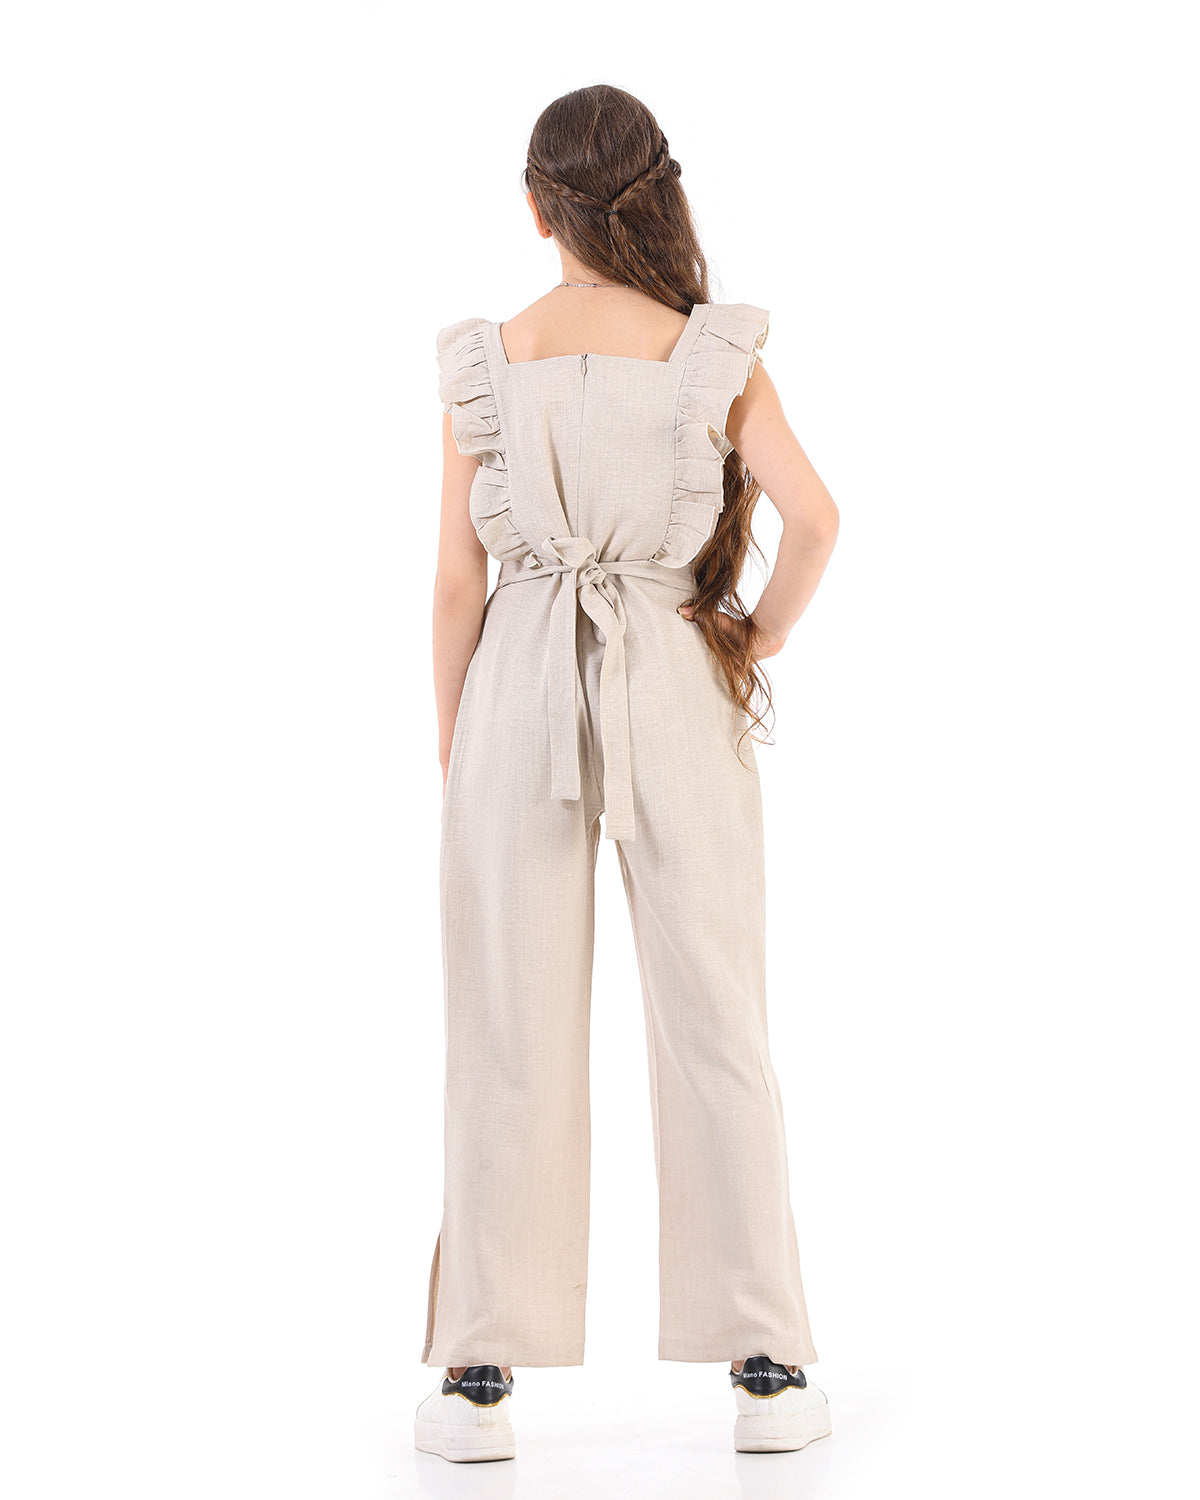 Casual Ruffle Light Beige Jumpsuits For Girls